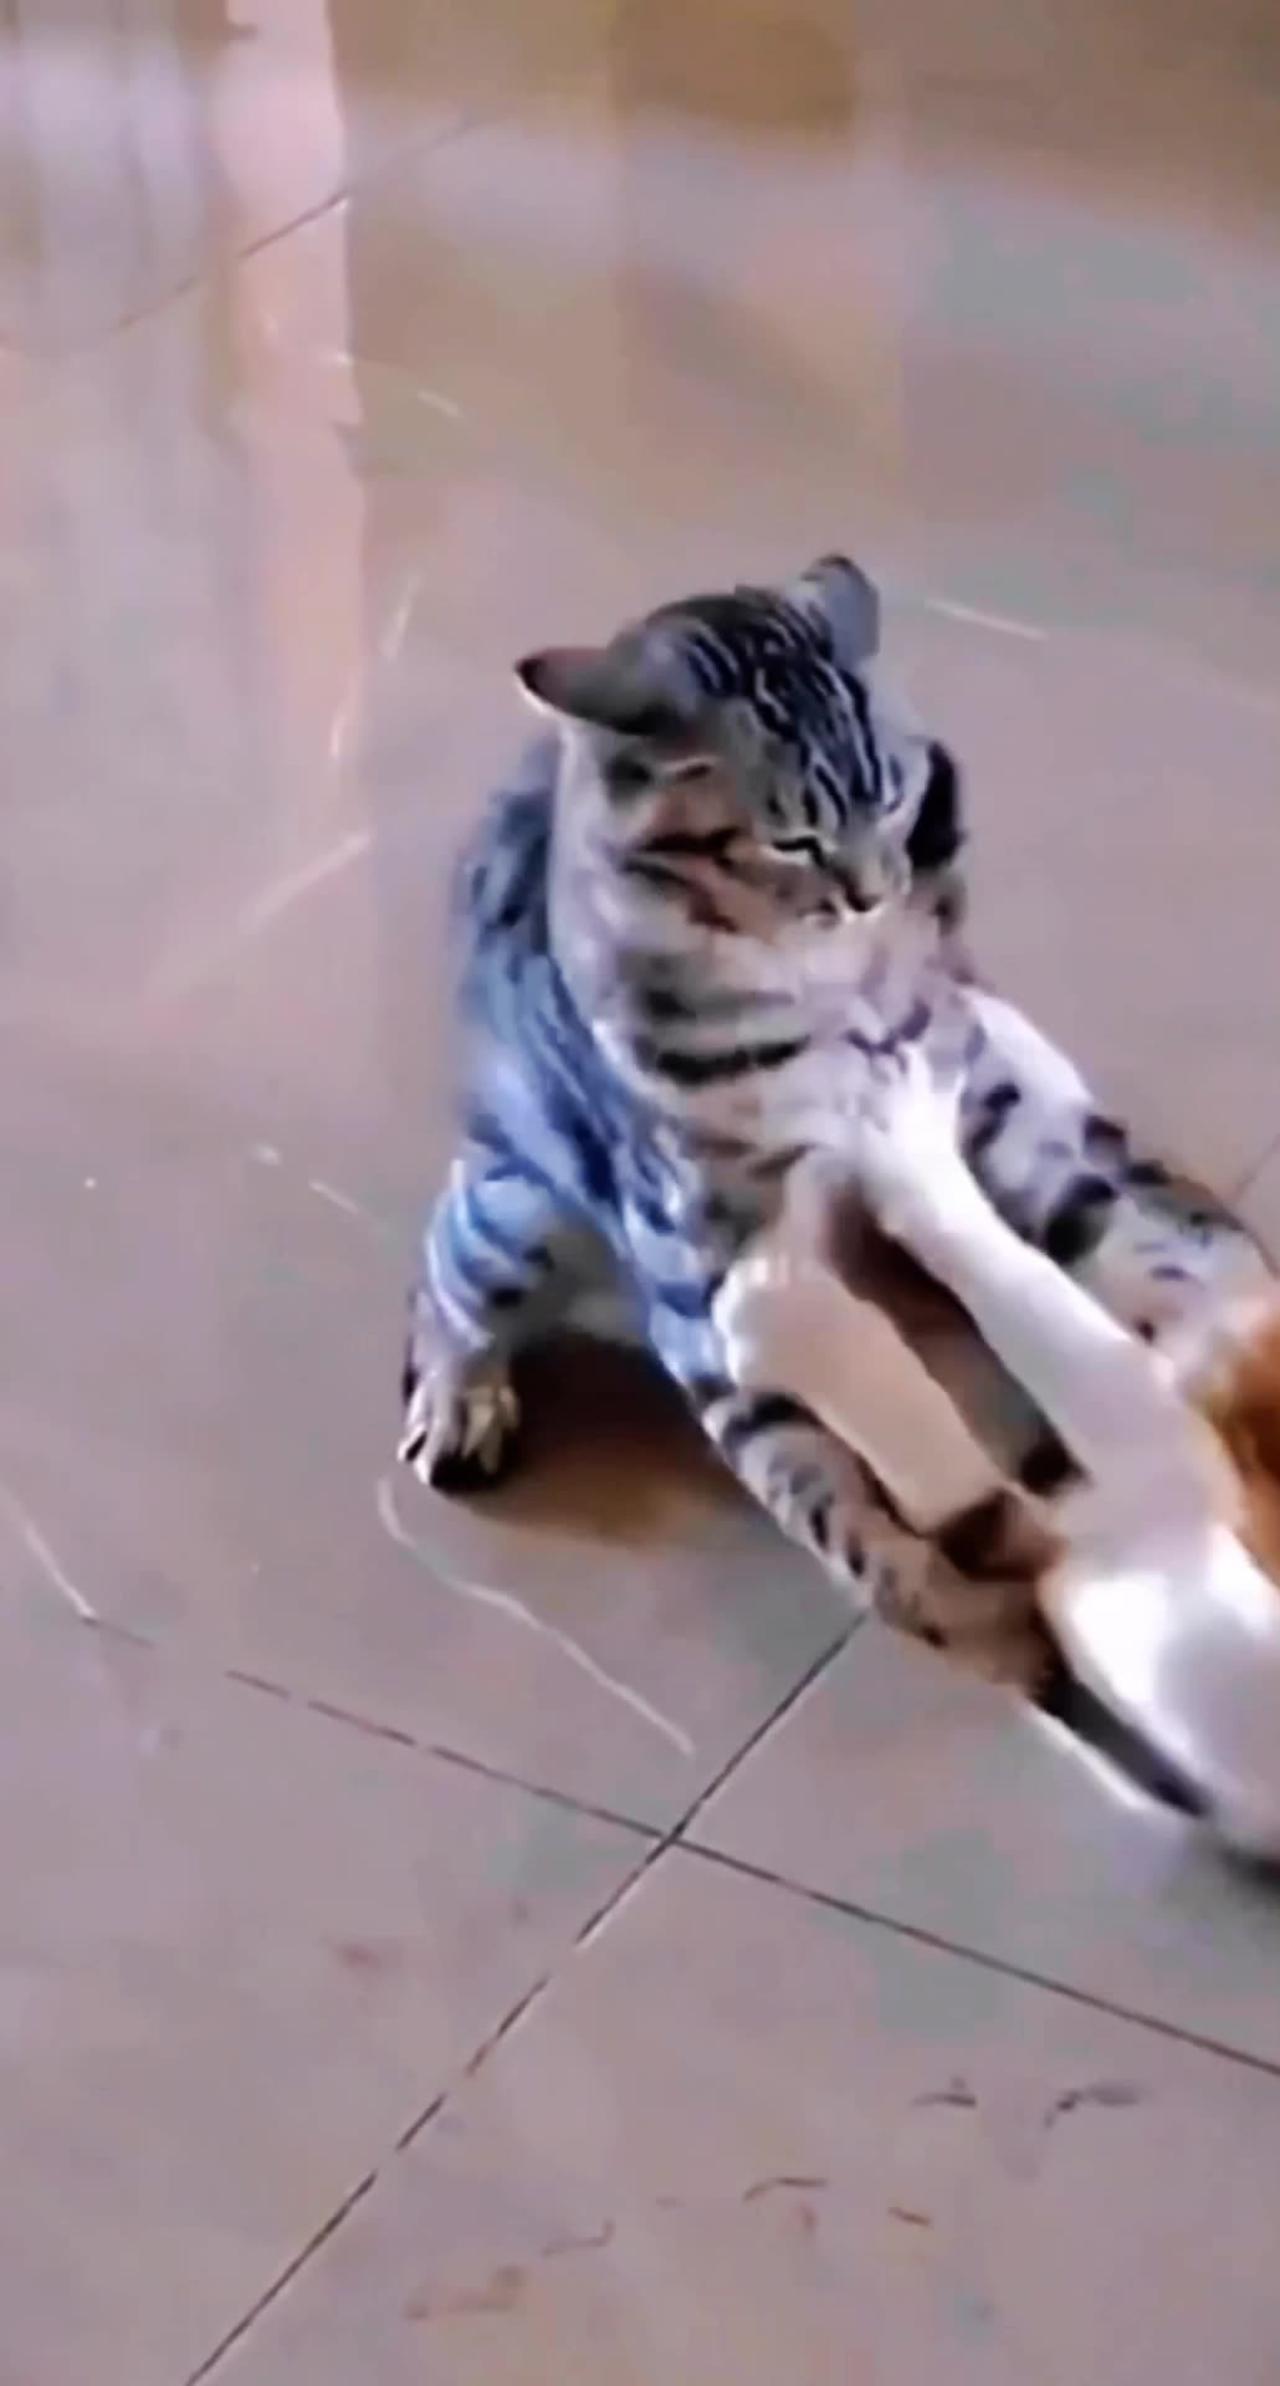 Cute cat's amazing fight | cats fight on home | super hit funny cats video #catsfight